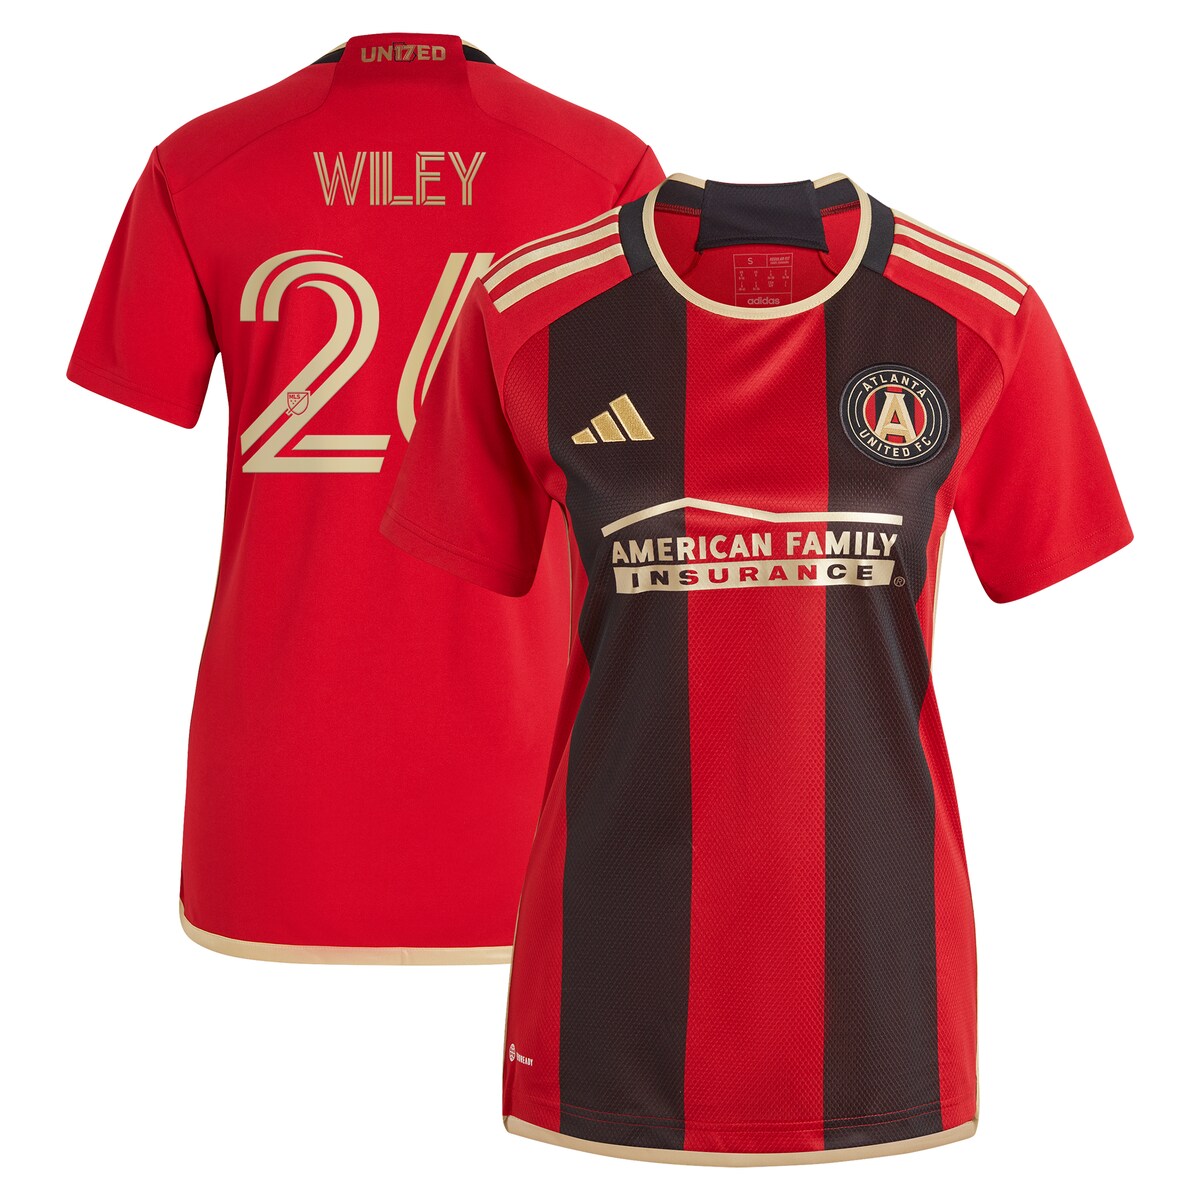 Look and feel like the real deal when you add this Caleb Wiley 2024 The17's Kit Replica Player Jersey to your Atlanta United FC collection. The jersey is a throwback to when it all started for Atlanta United FC. Every stitch embodies the ''Spirit of 17'' - a masterful reminder that nothing is given and everything must be earned. The ''We are the A'' jock tag also embodies the passion that radiates throughout the club from the players, coaches and fans. The adidas gear features AEROREADY technology as well as ventilated, mesh panels that work together to keep you comfortable and dry wherever you choose to cheer on Atlanta United FC.Ventilated mesh panel insertsTagless collar for added comfortMachine wash, tumble dry lowBrand: adidasImportedEmbroidered adidas logo on right chestAEROREADY technology absorbs moisture and makes you feel drySewn on embroidered team crest on left chestMaterial: 100% PolyesterShort sleeveHeat-sealed sponsor logo on chestBackneck taping - no irritating stitch on the backOfficially licensedReplica